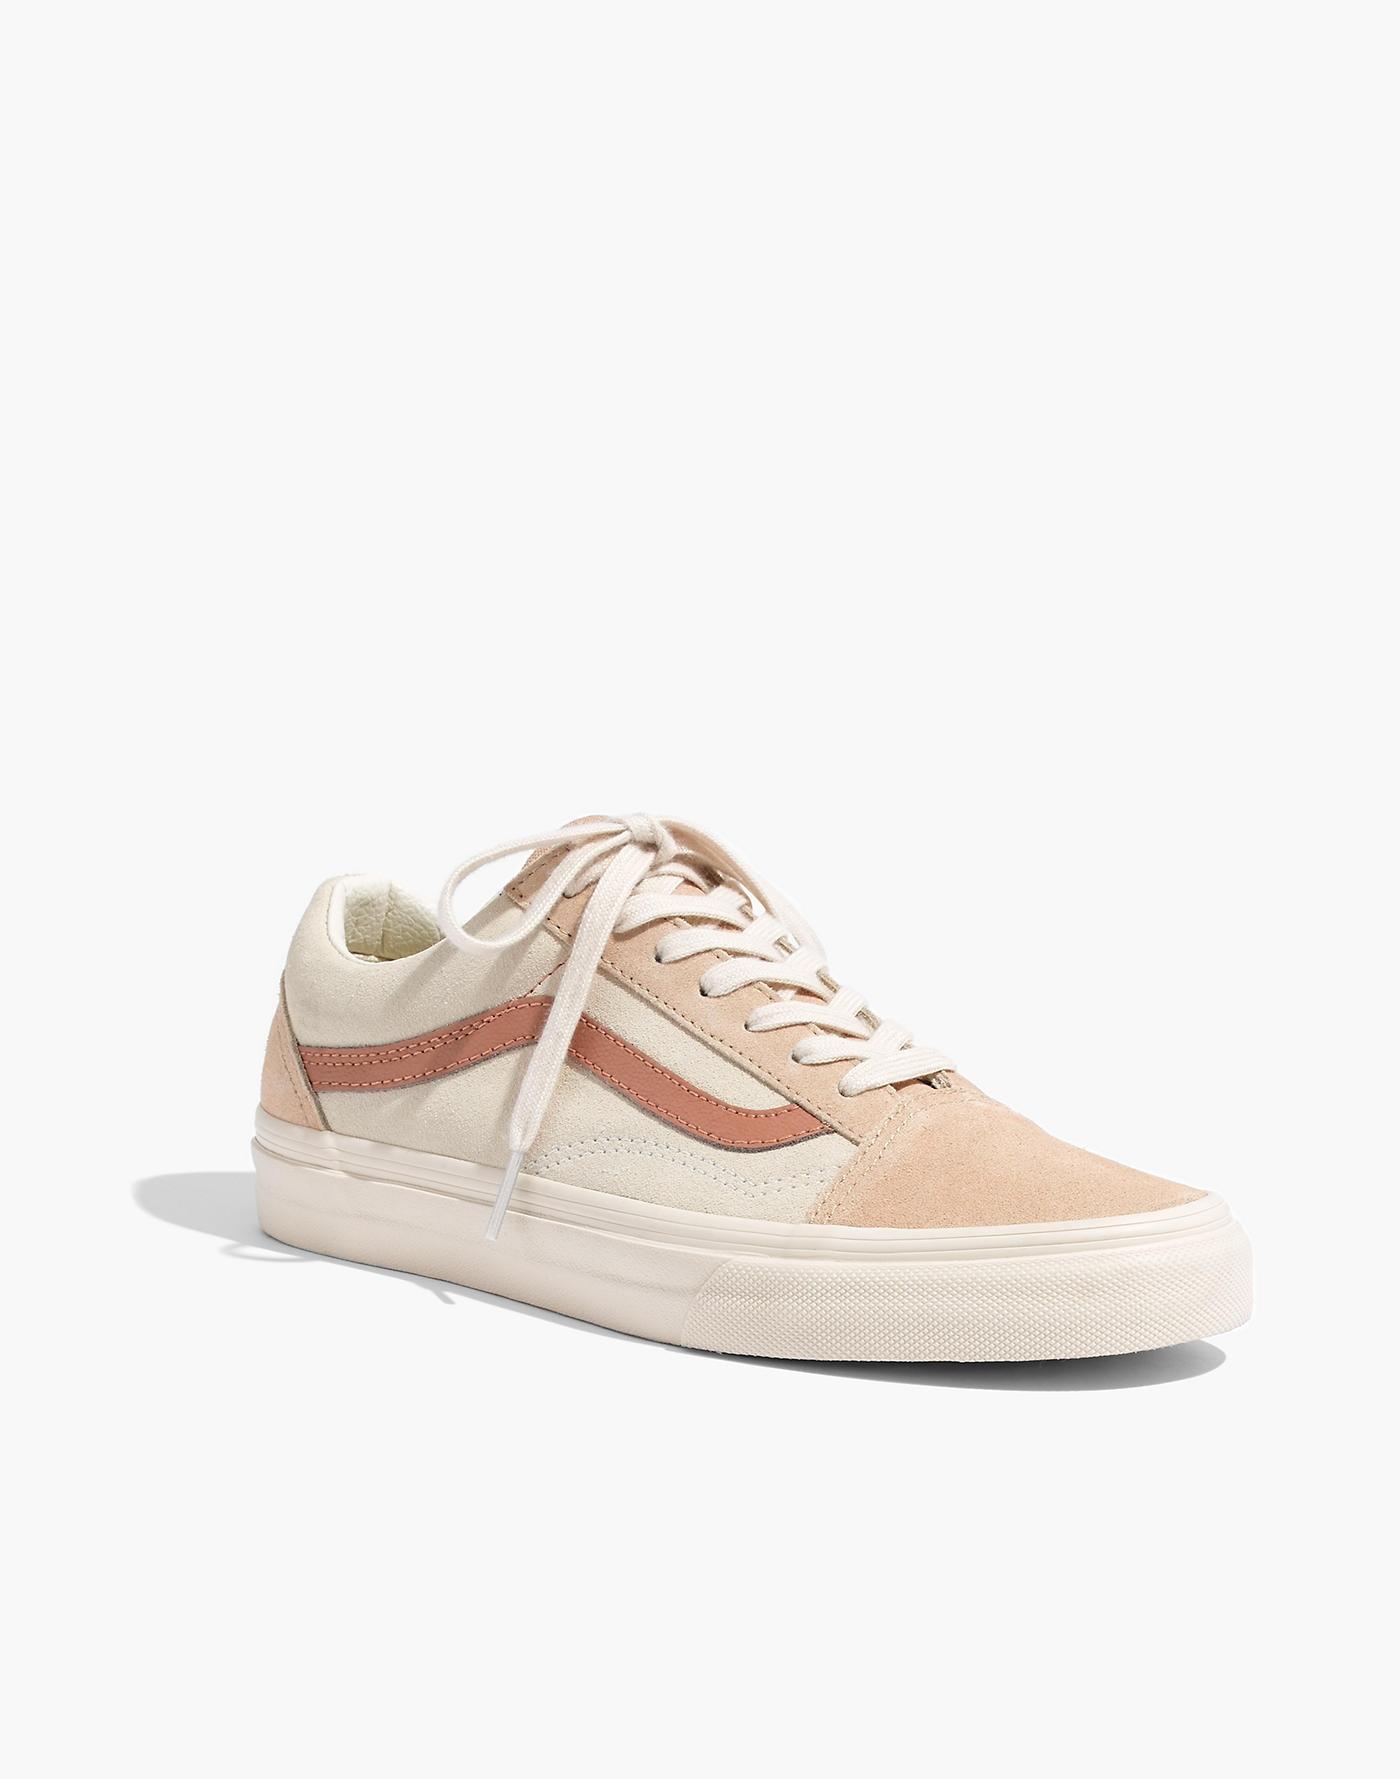 Madewell Suede X Vans Unisex Old Skool Lace-up Sneakers In Camel Colorblock  in Natural | Lyst